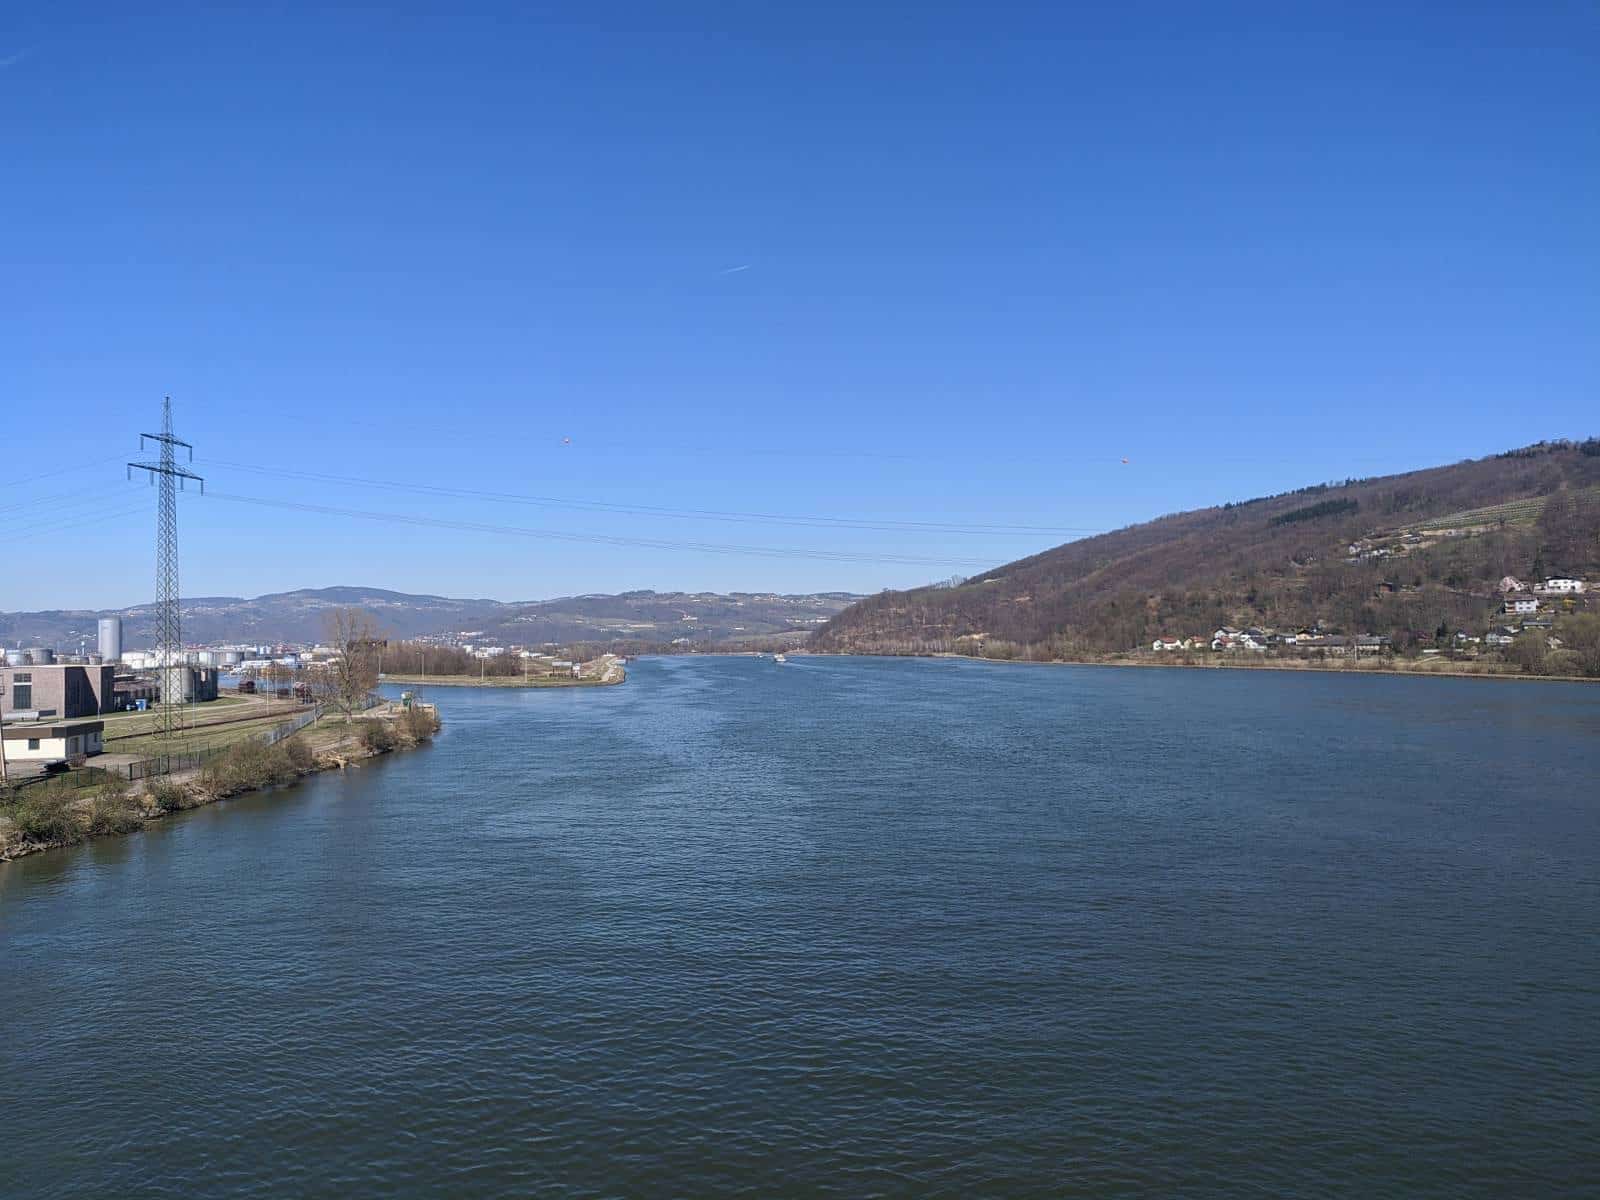 Returning to the Danube and crossing to the north side. Linz is off in the distance to the left